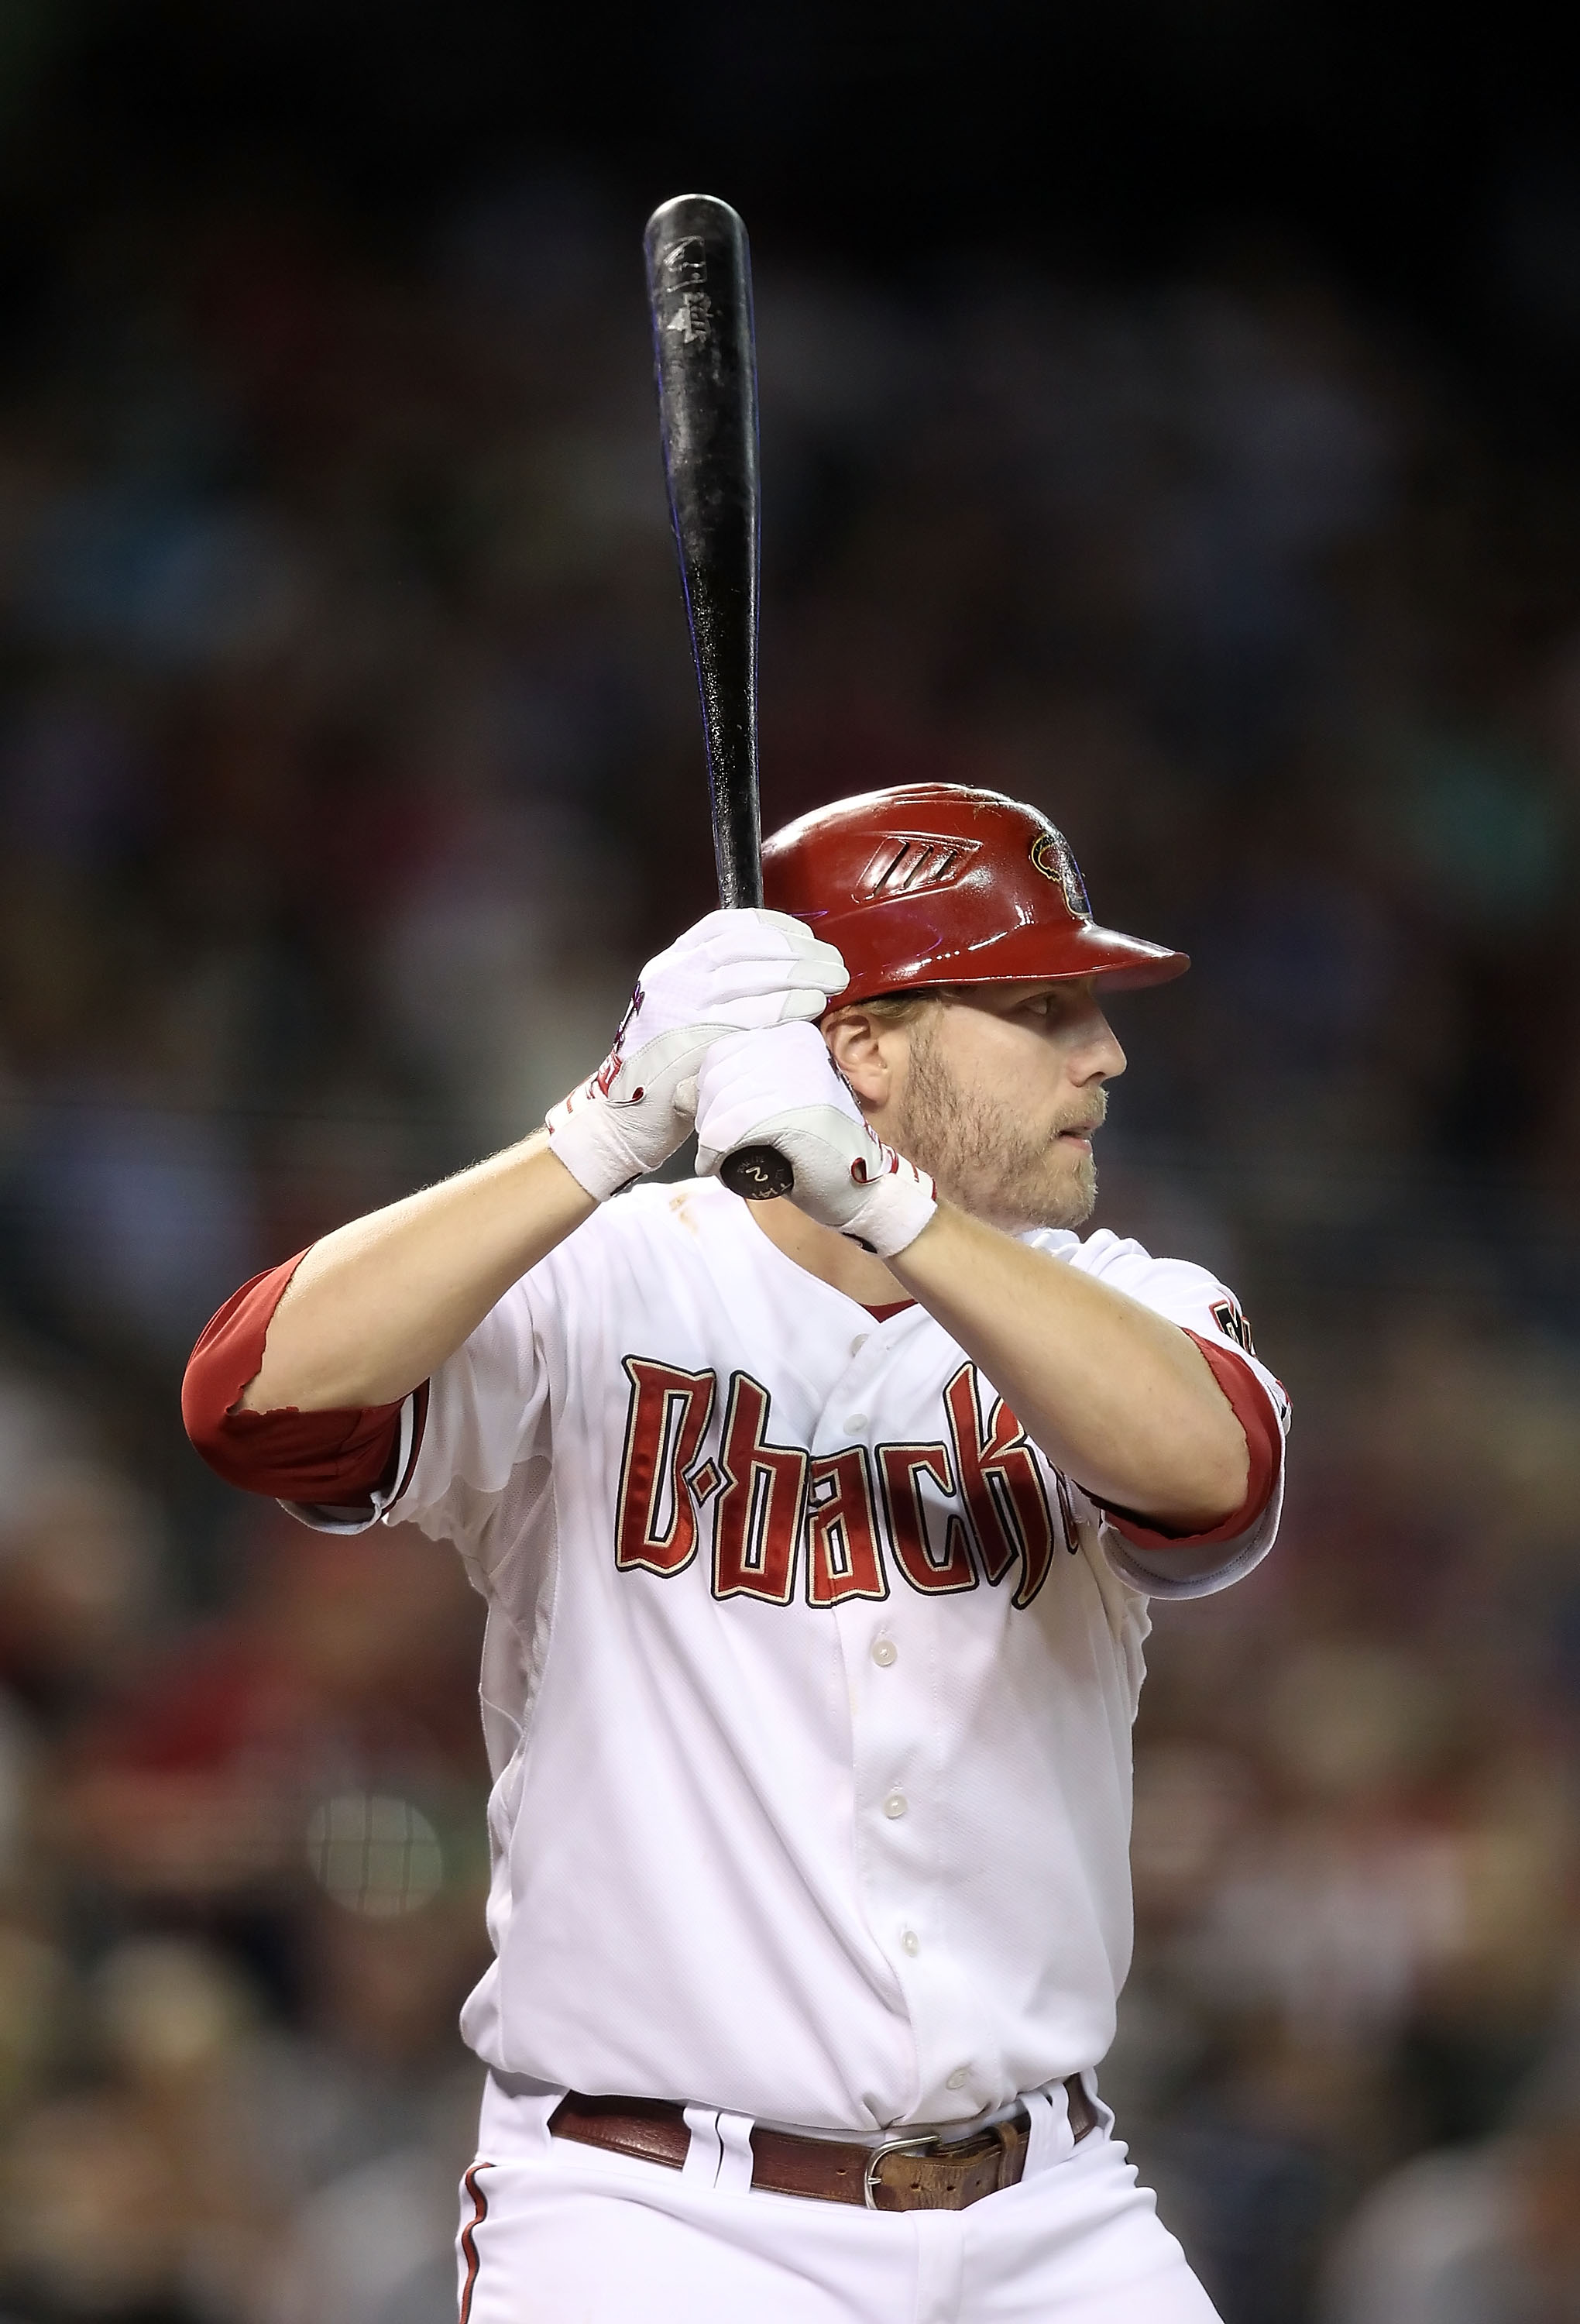 PHOENIX - SEPTEMBER 24:  Mark Reynolds #27 of the Arizona Diamondbacks bats against the Los Angeles Dodgers during the Major League Baseball game at Chase Field on September 24, 2010 in Phoenix, Arizona.  (Photo by Christian Petersen/Getty Images)